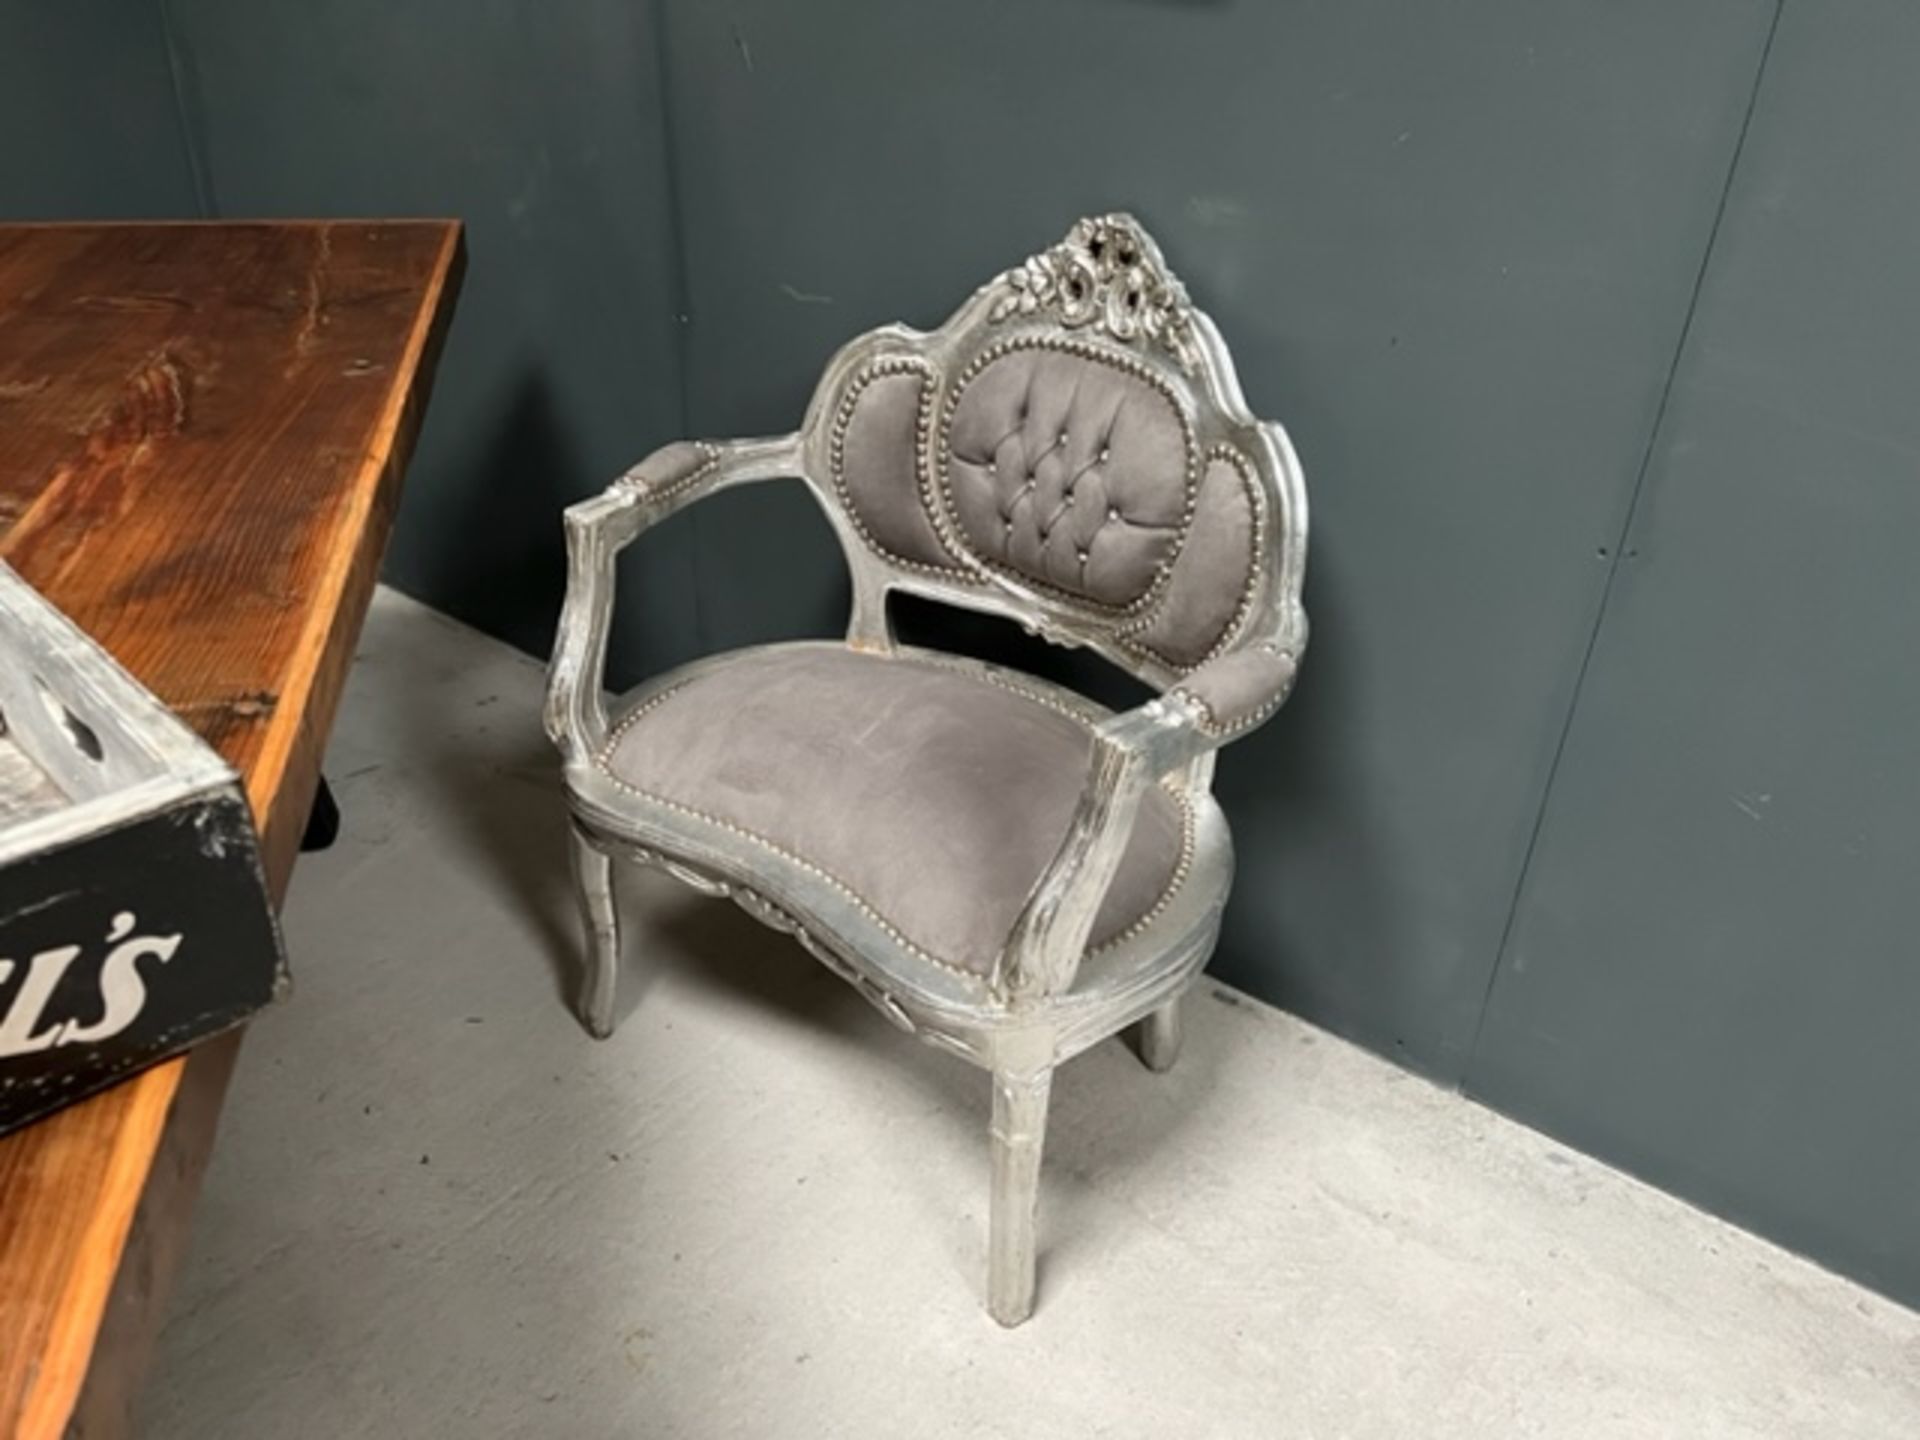 SILVER CHAIR- HANDFINISHED DISTRESSED ANTIQUE SILVER LEAF FRAME AND UPHOLSTERY